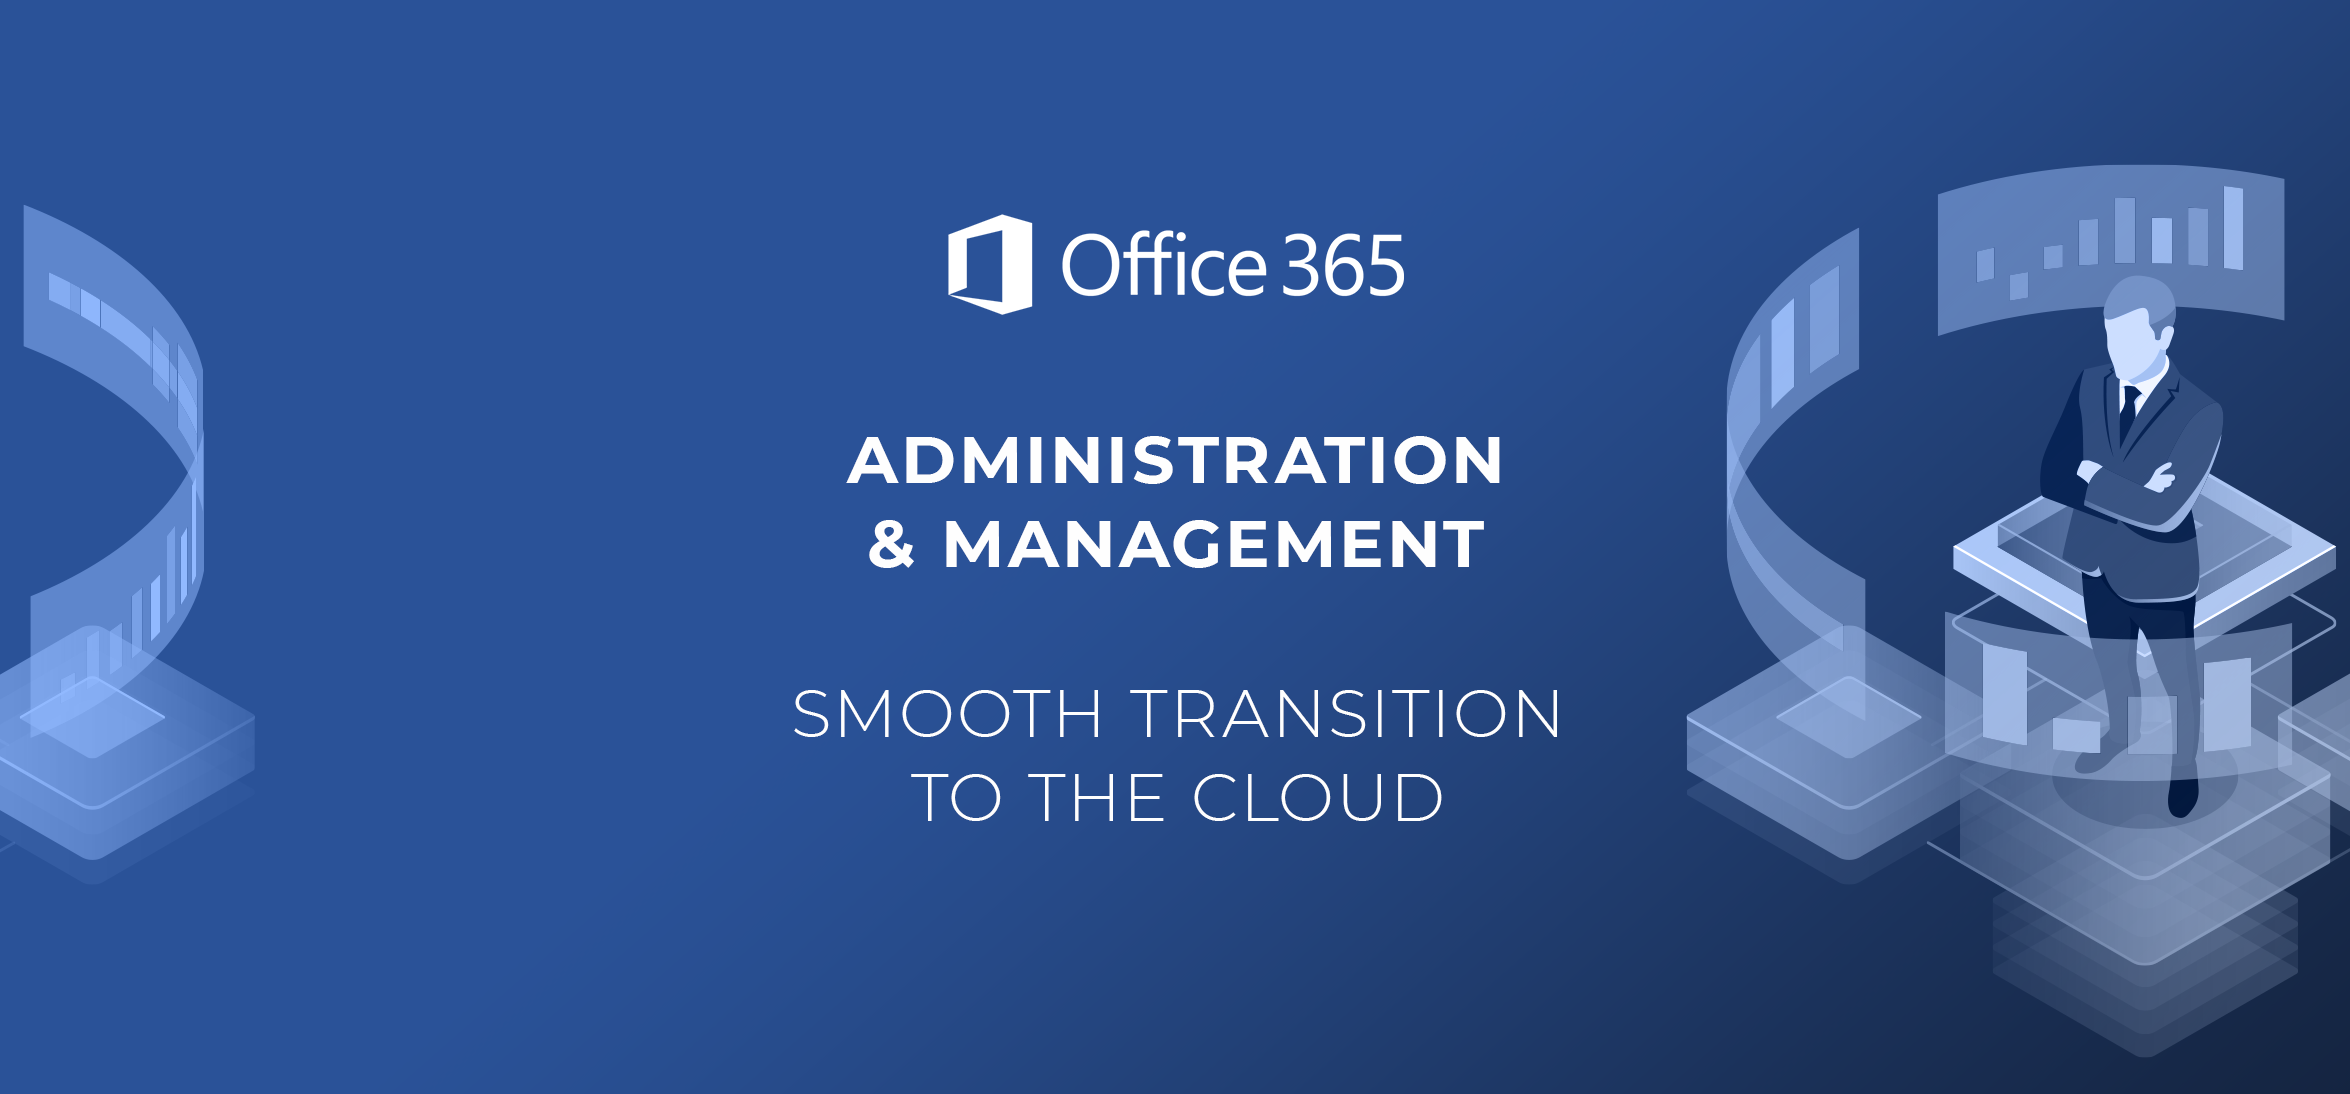 Microsoft Office 365 Administration Services in Great Meadows NJ, 07838